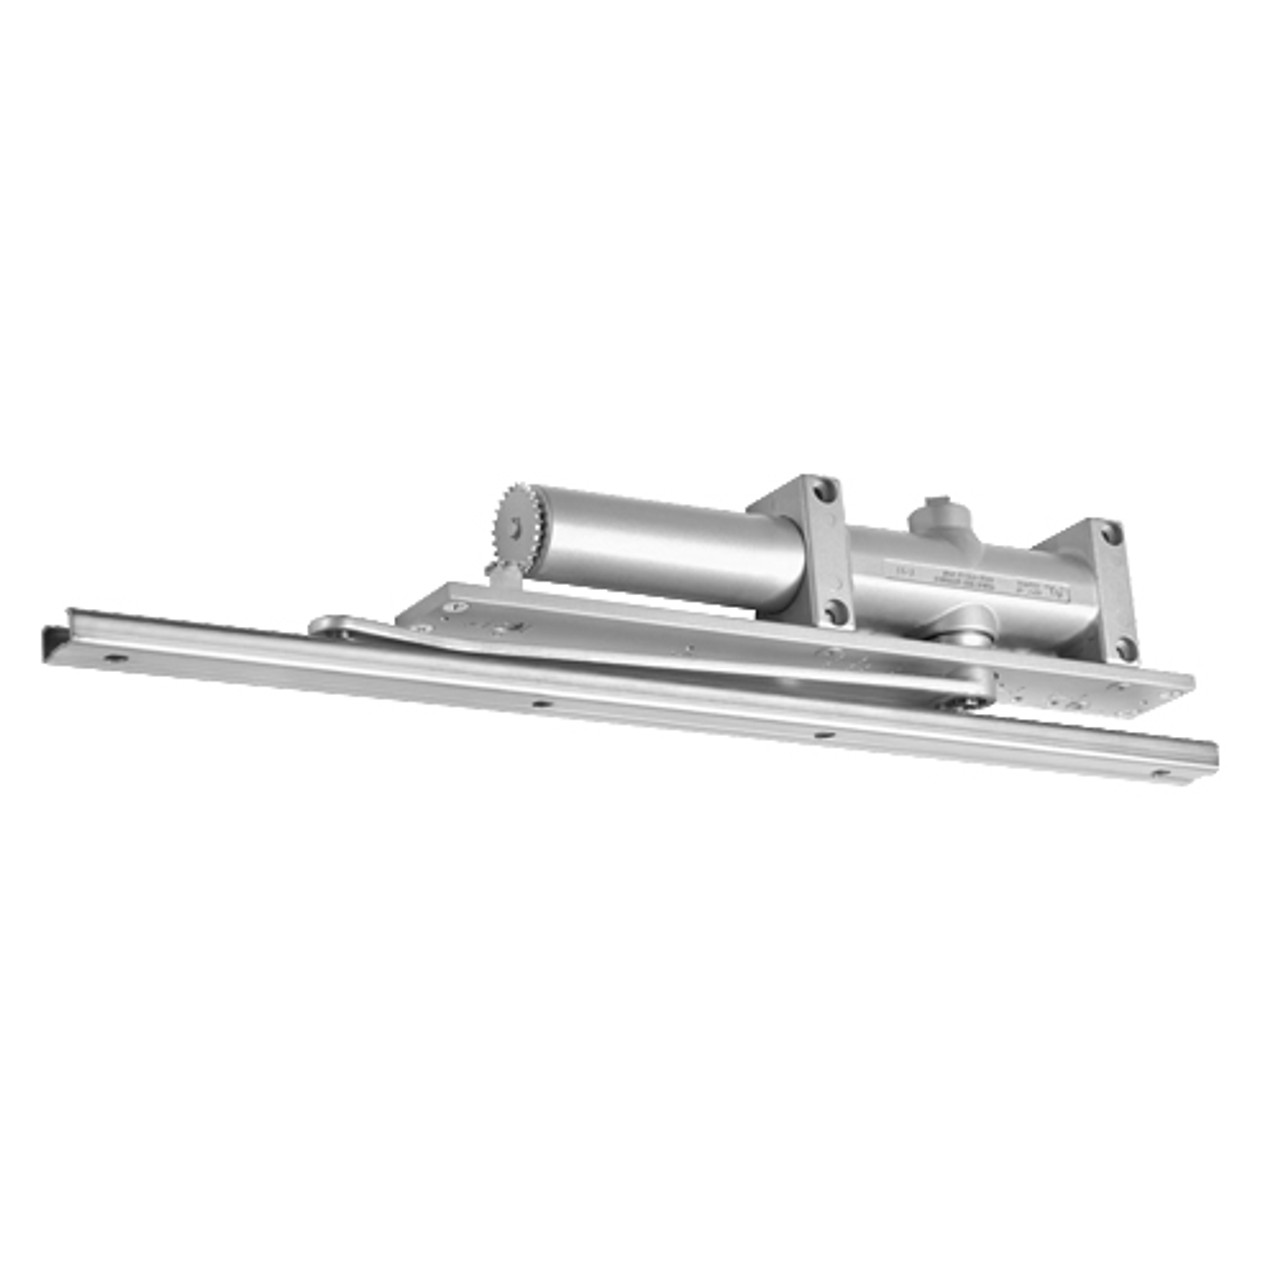 7970-689-LH Norton 7900 Series Non-Hold Open Overhead Concealed Security Closers with Multi-Sized Spring 1-6 in Aluminum Finish